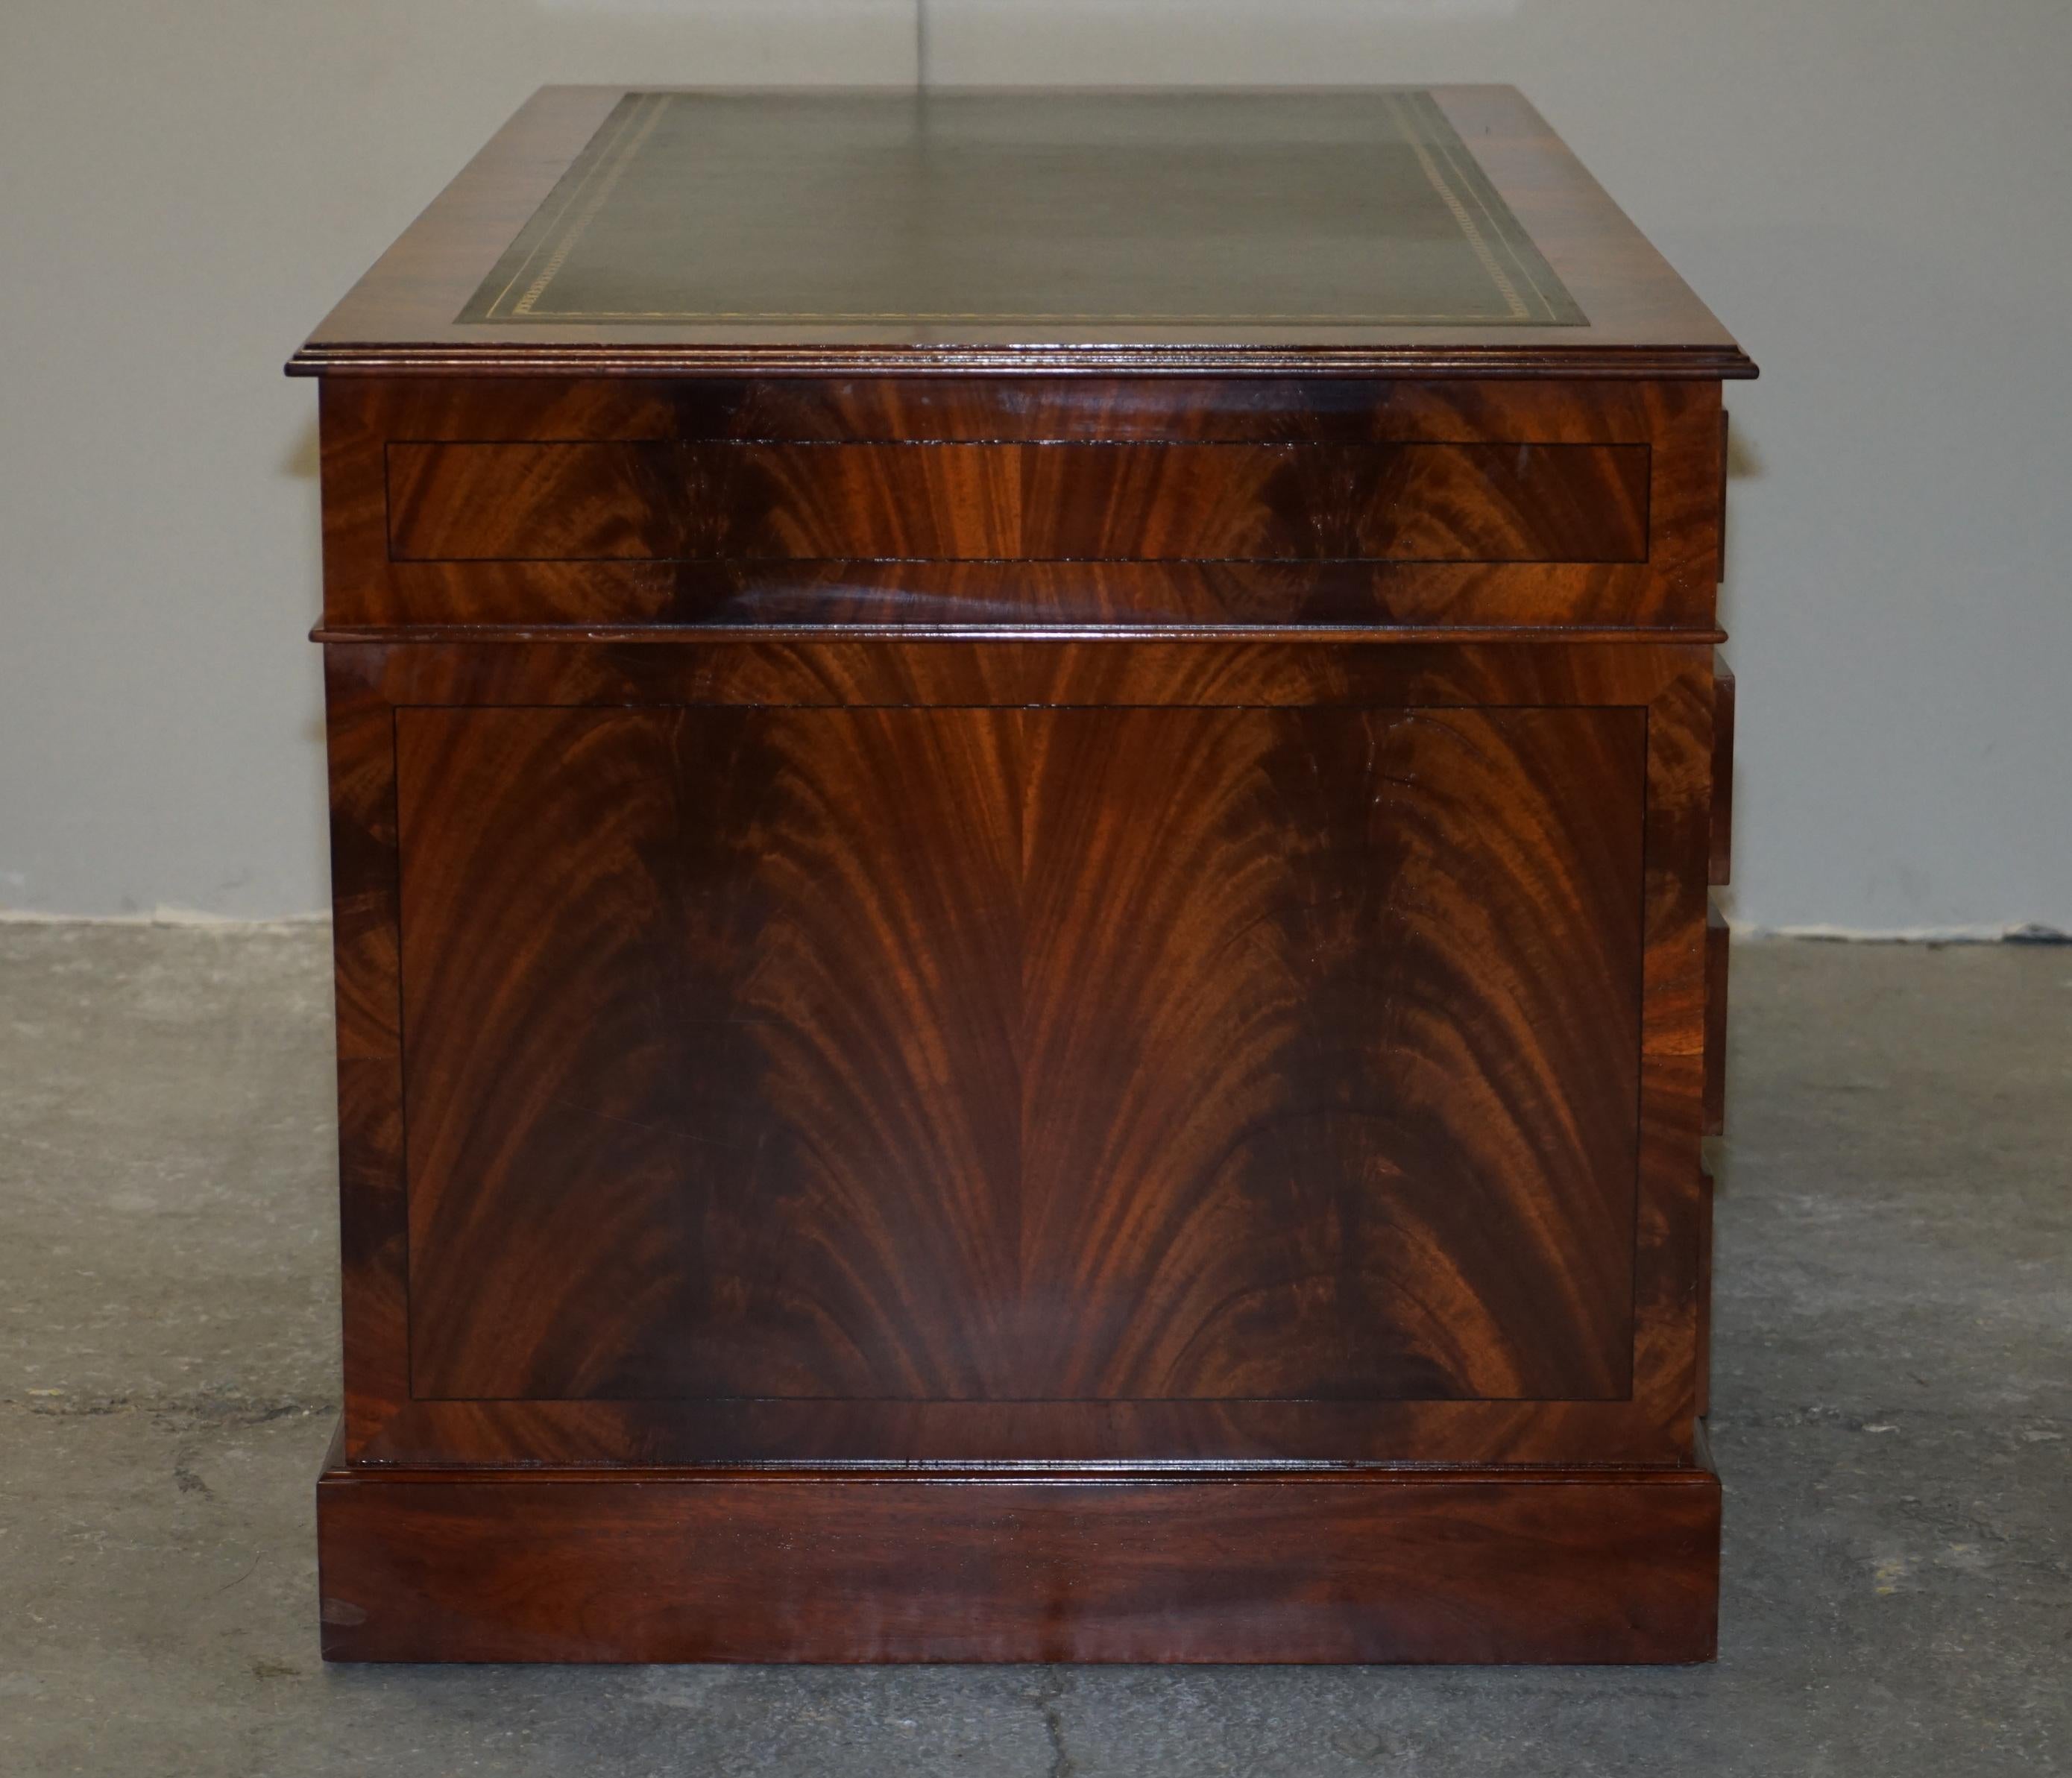 ANTIQUE FLAMED HARDWOOD DESK FROM PRINCESS DIANA'S FAMiLY HOME SPENCER HOUSE For Sale 10